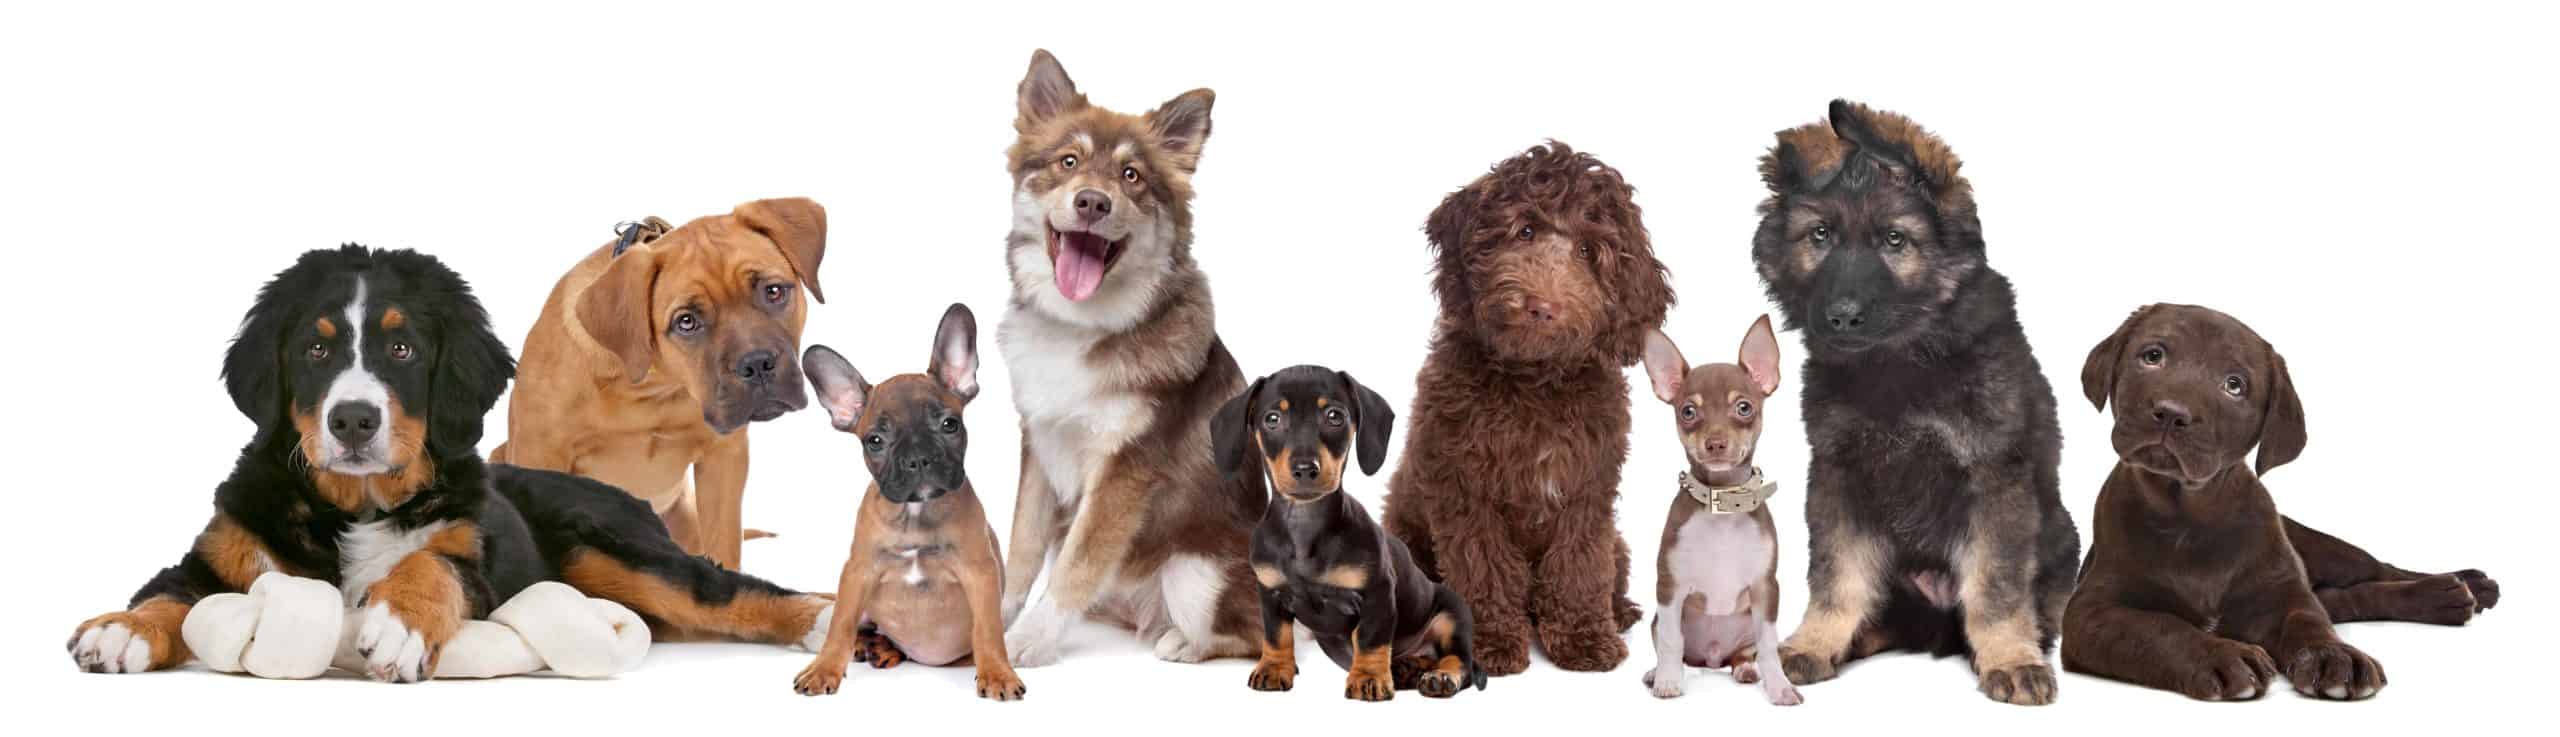 Dog name: Showcase your pet's personality with the perfect dog nam